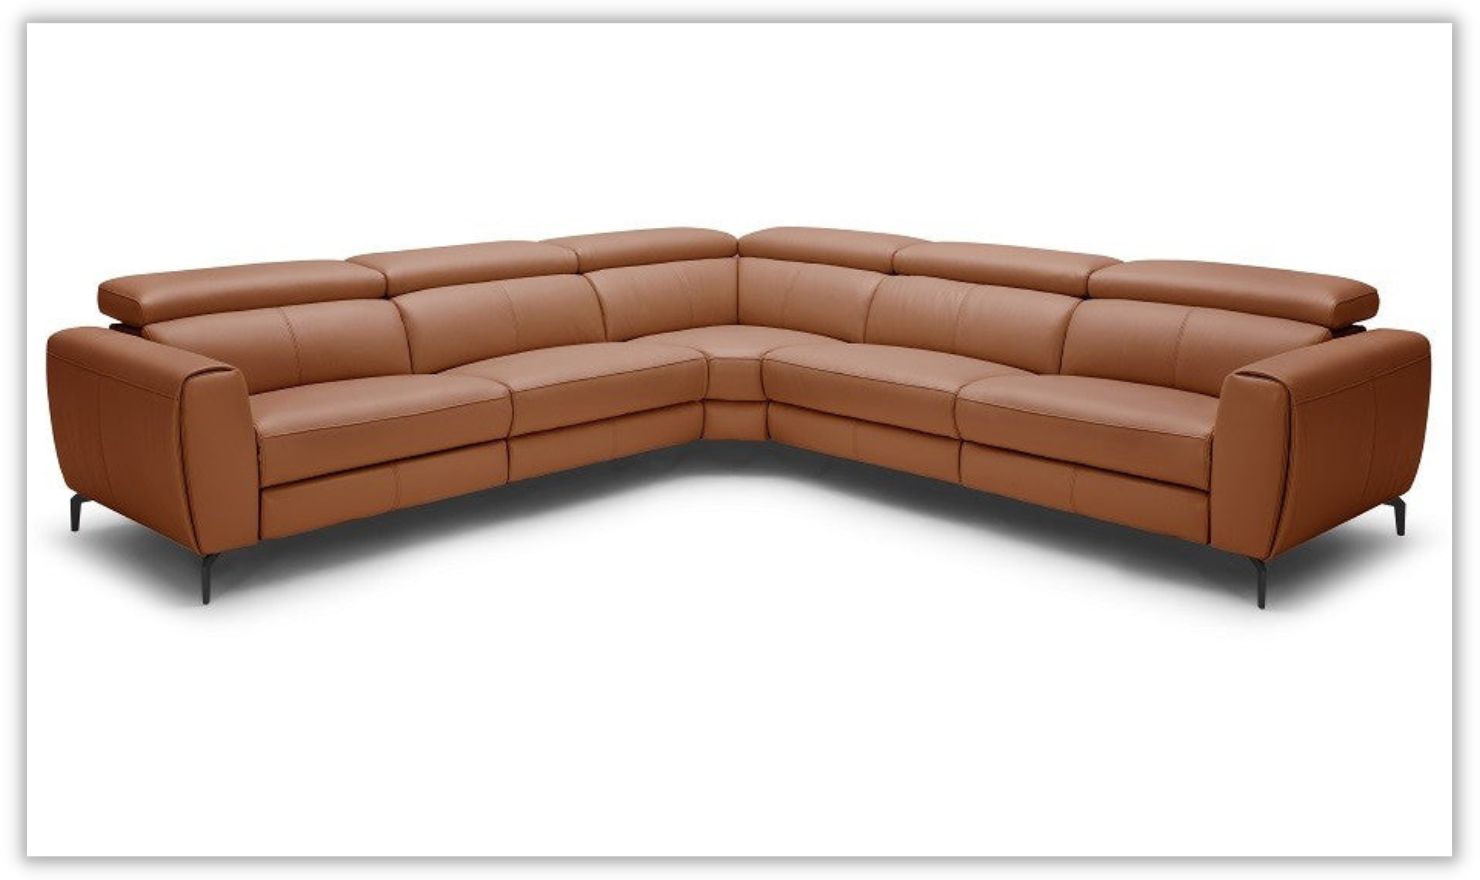 Azur Corner Leather Motion Recliner Sectional Sofa